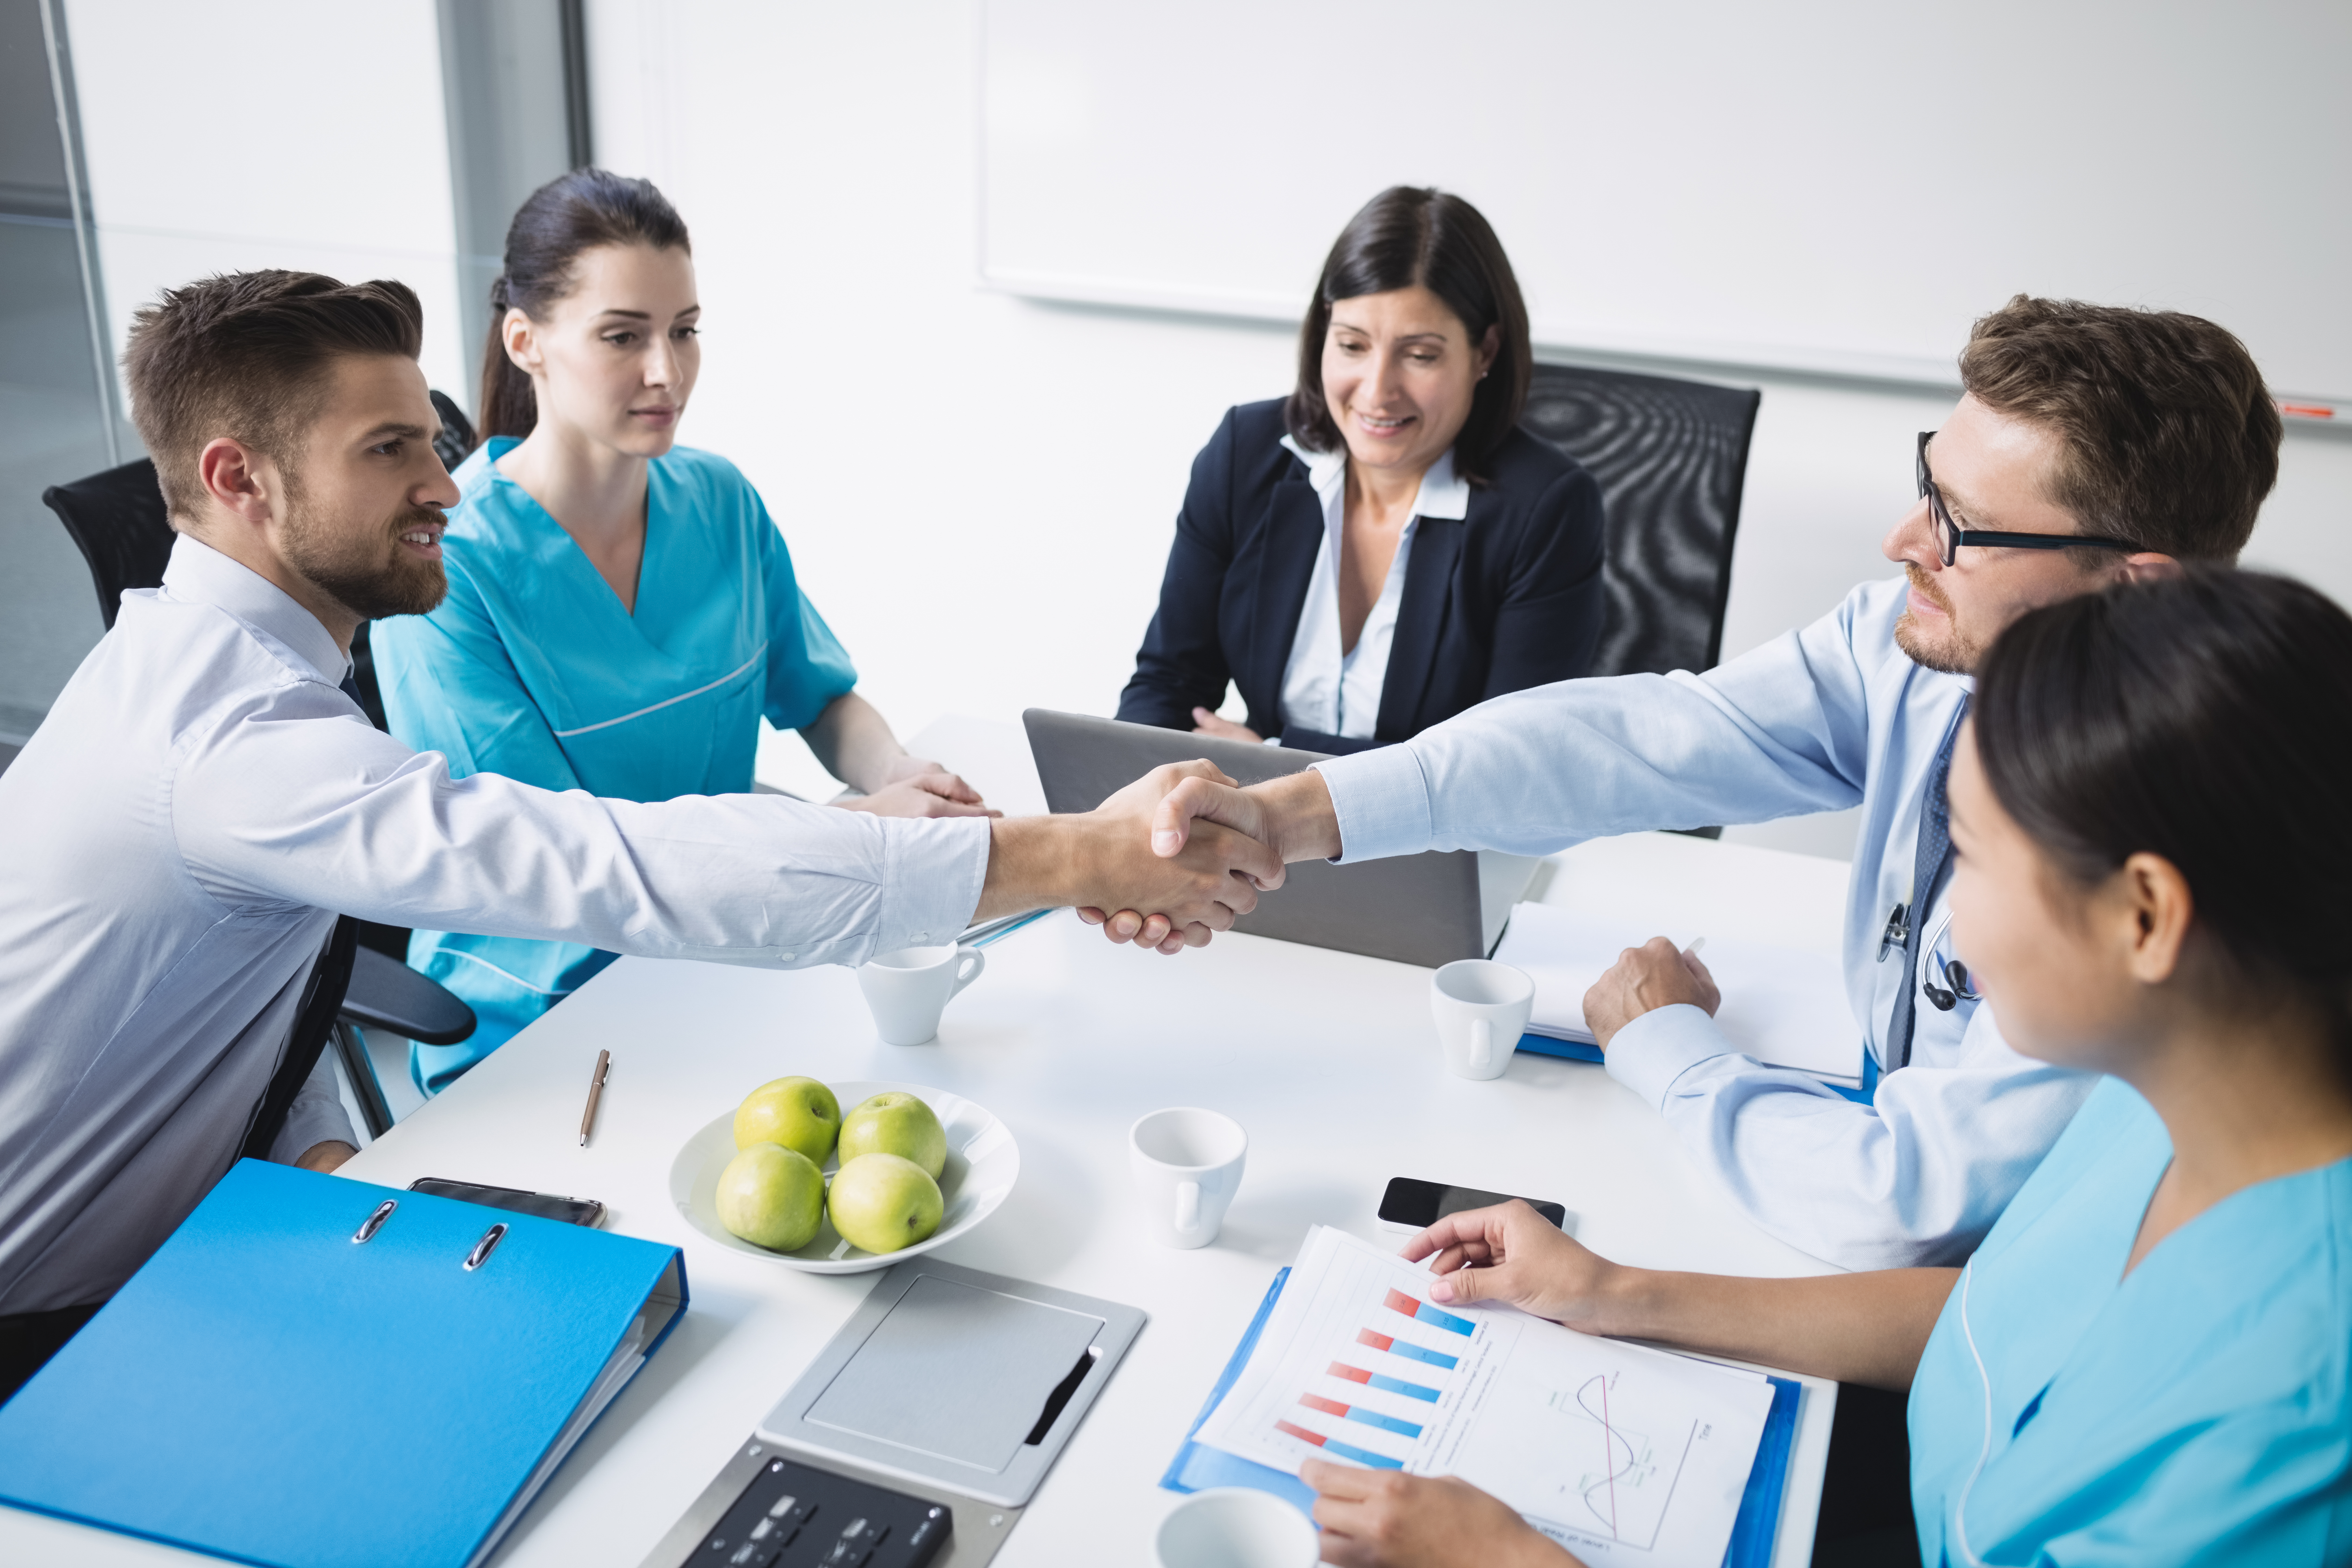 Doctors shaking hands with each other in meeting at conference room